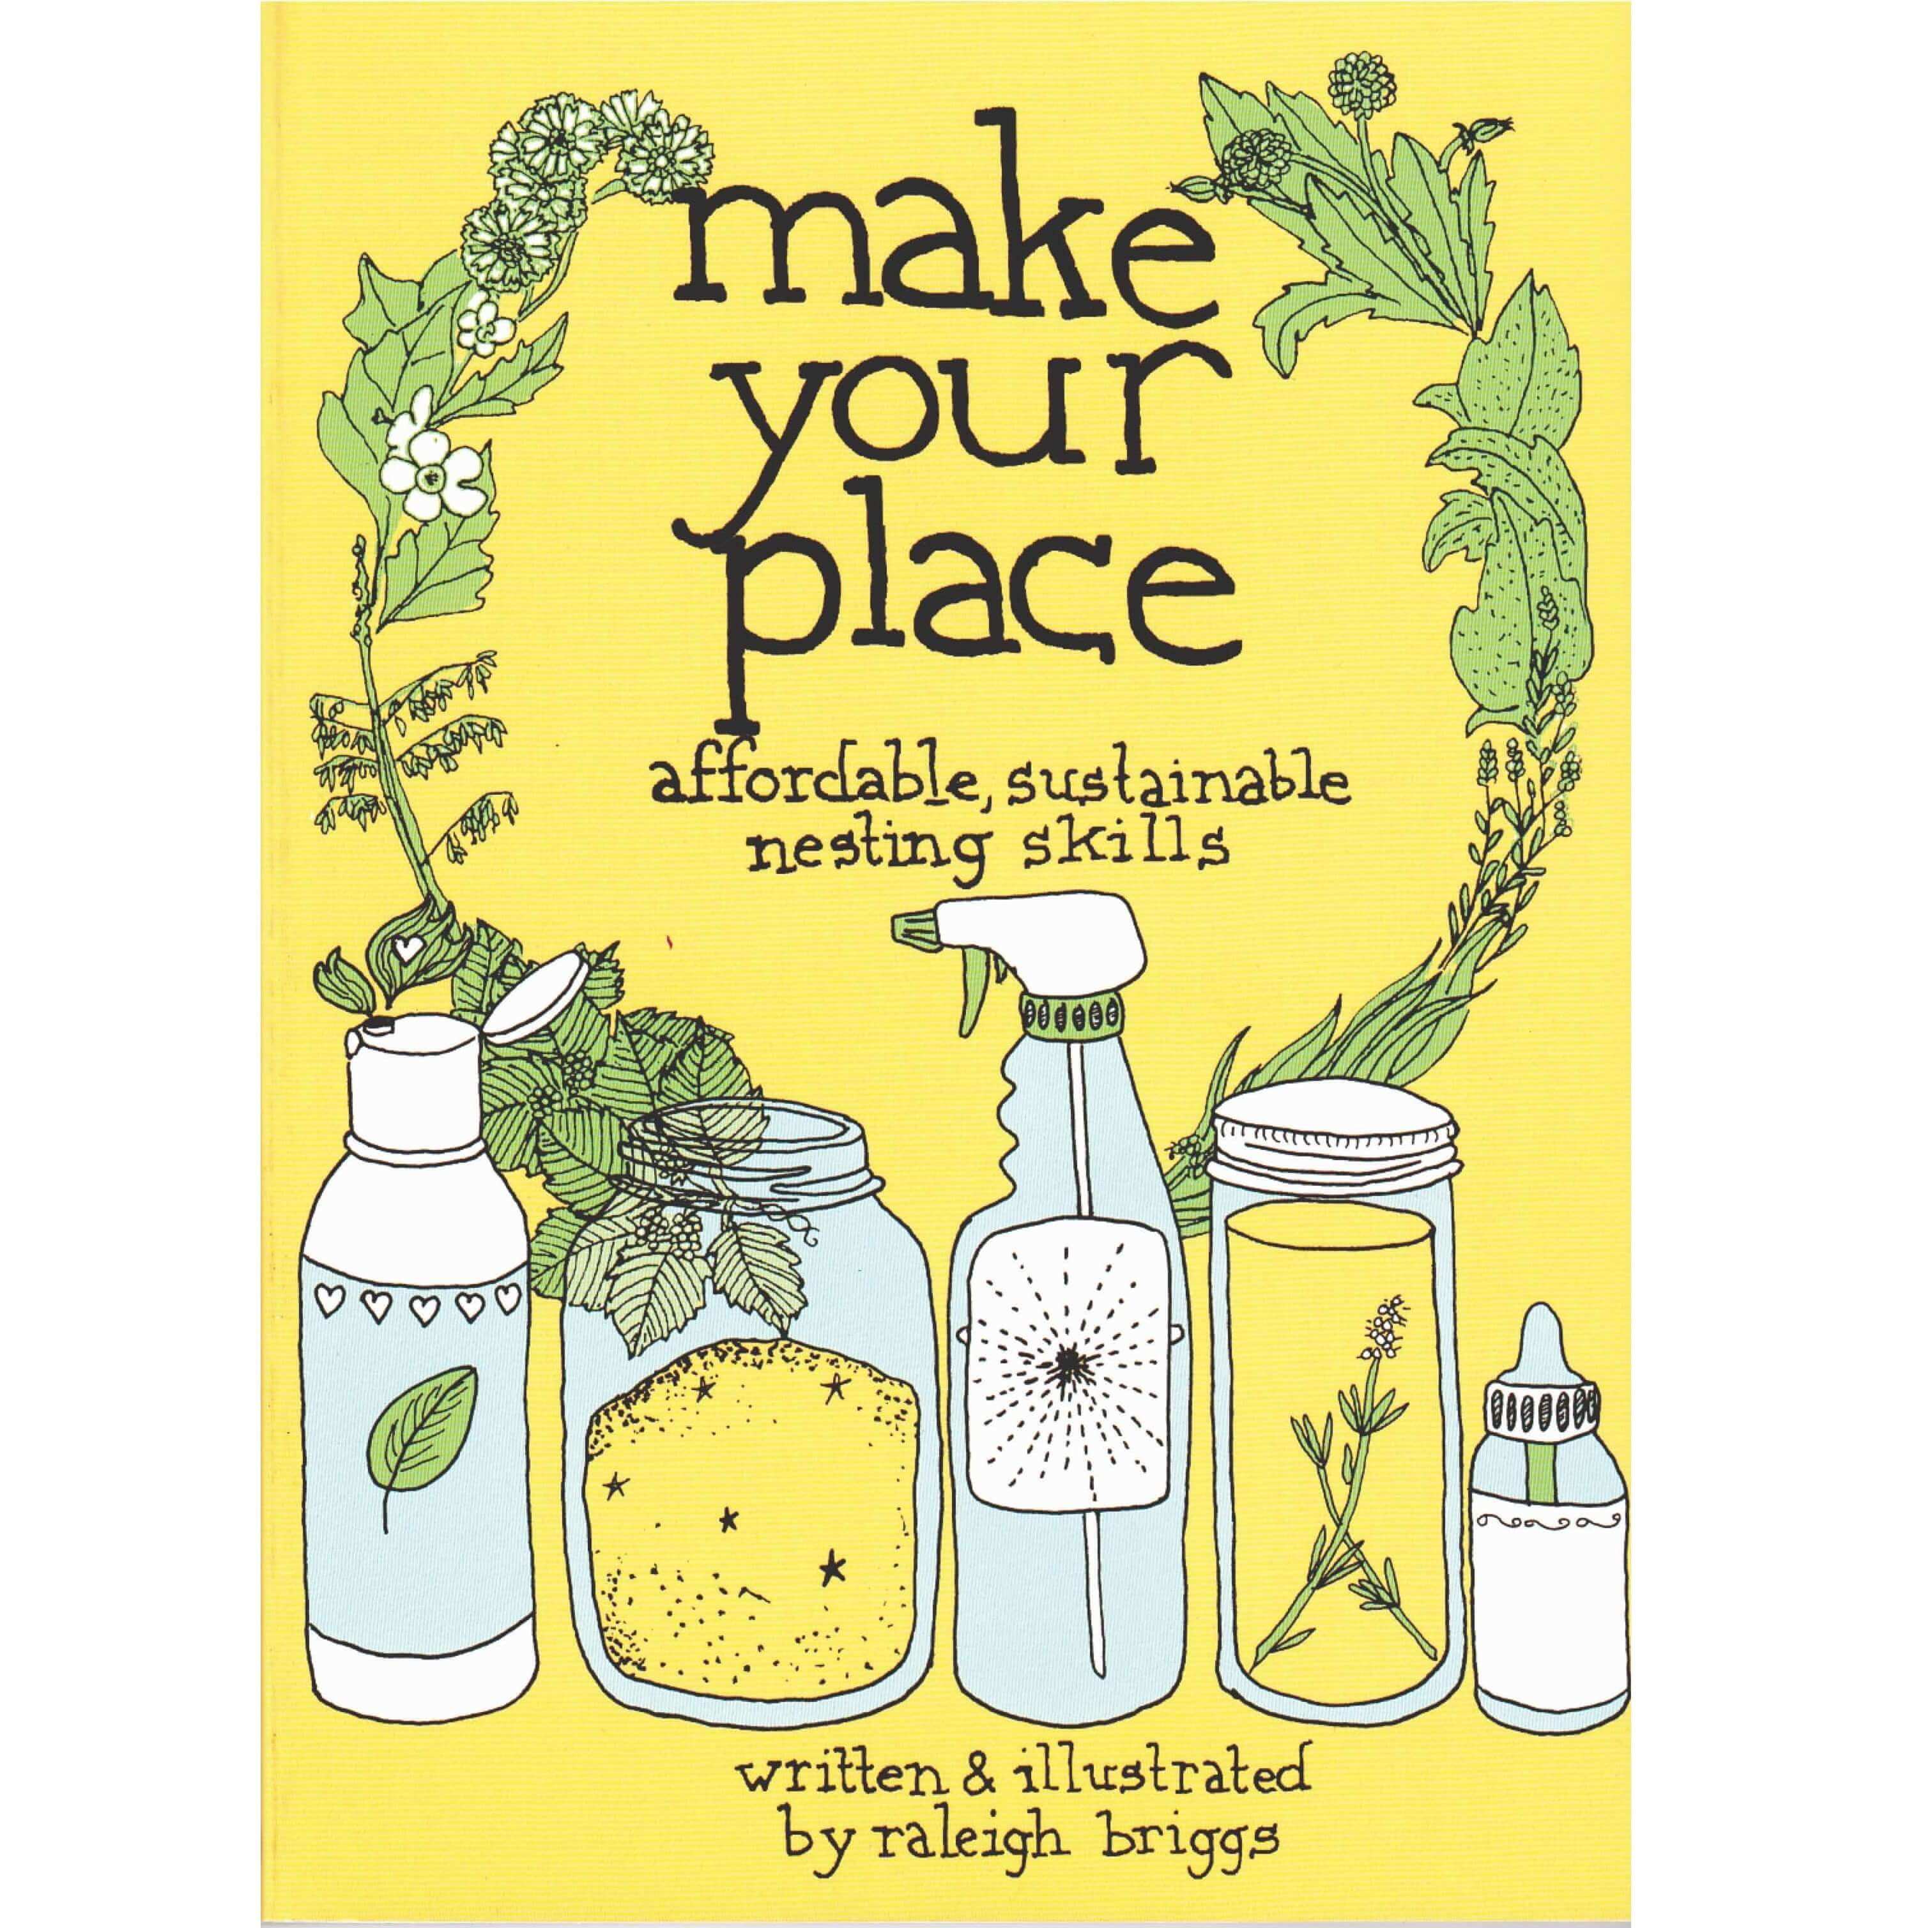 Make Your Place - Independent publisher and distributor, Made in USA Microcosm Publishing